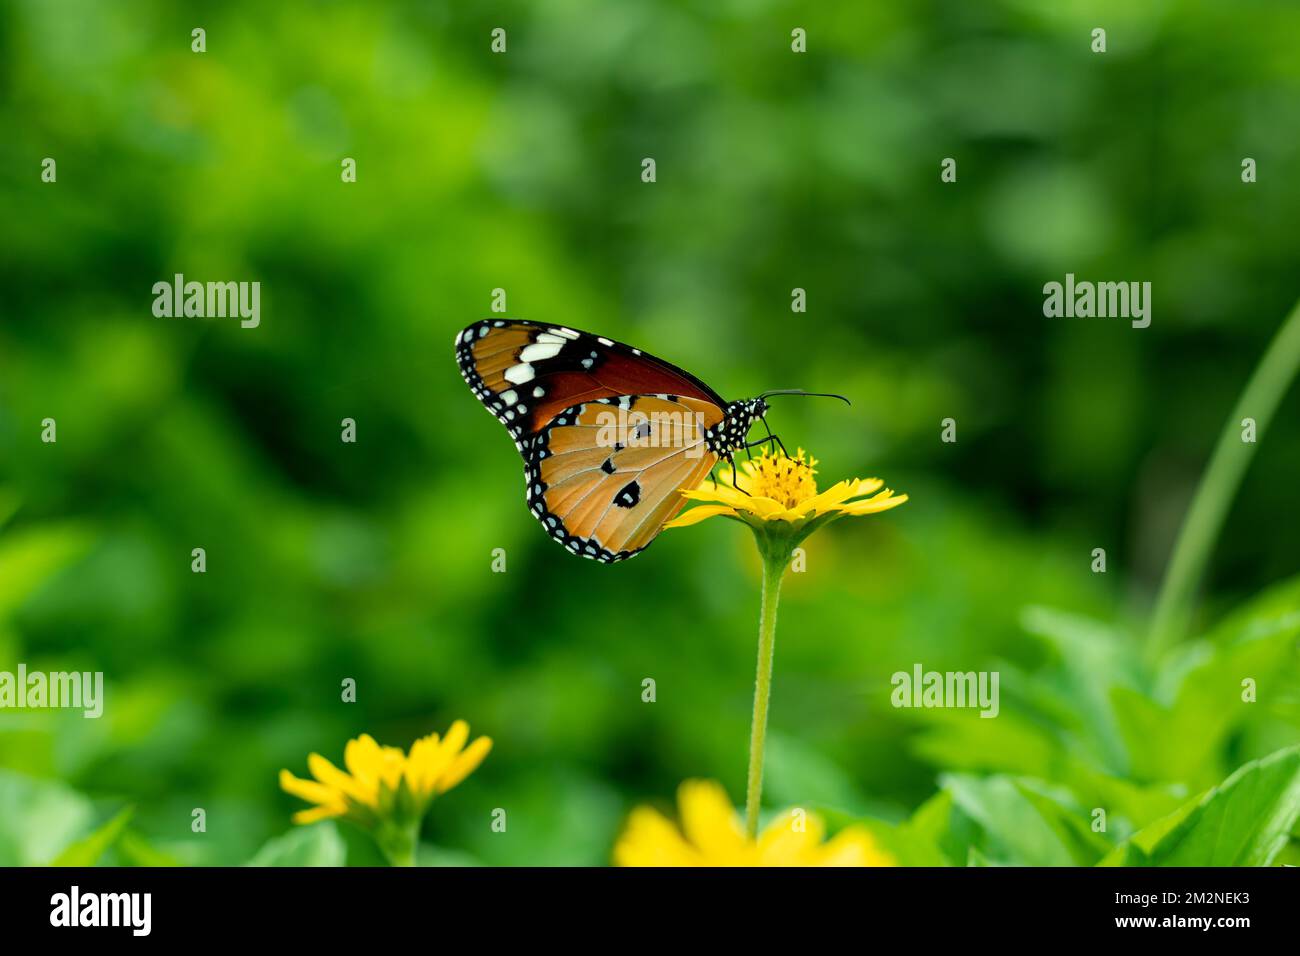 The butterfly holds very still while sitting on certain plants it will blend in. Some butterfly wings look like leaves, flowers, or tree bark. Stock Photo